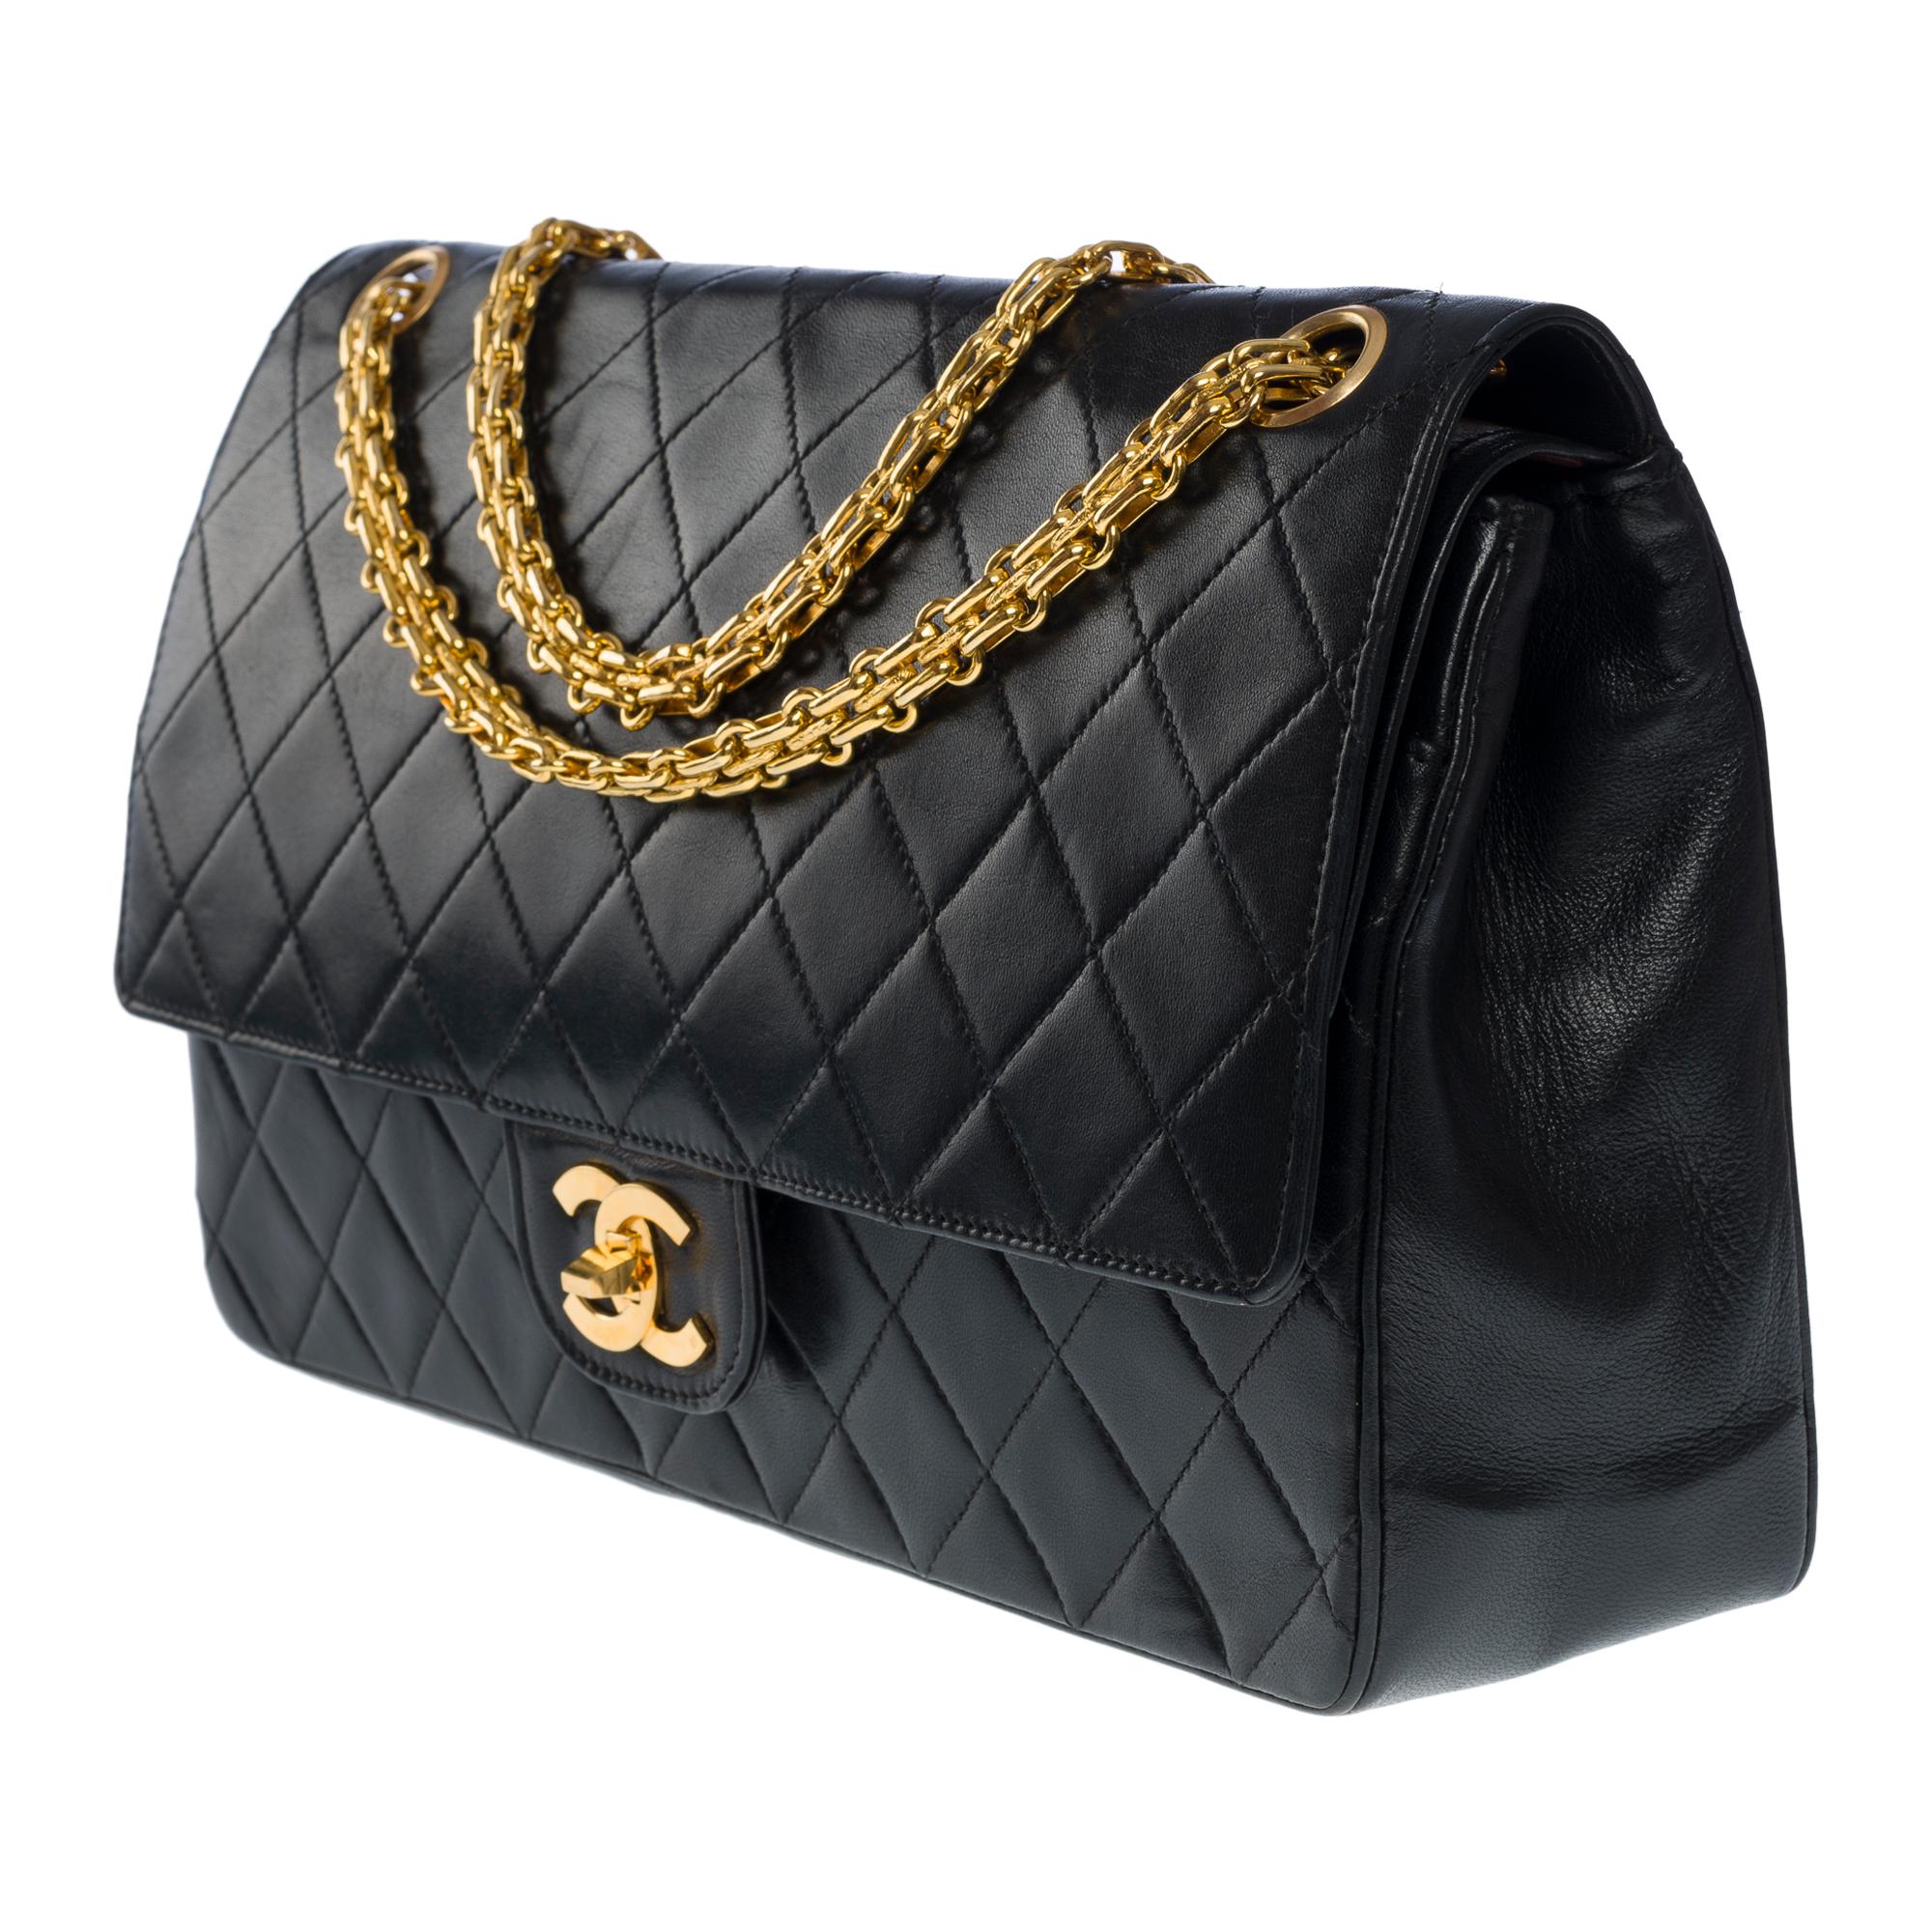 Women's Chanel Timeless/Classic double flap shoulder bag in black quilted lambskin, GHW